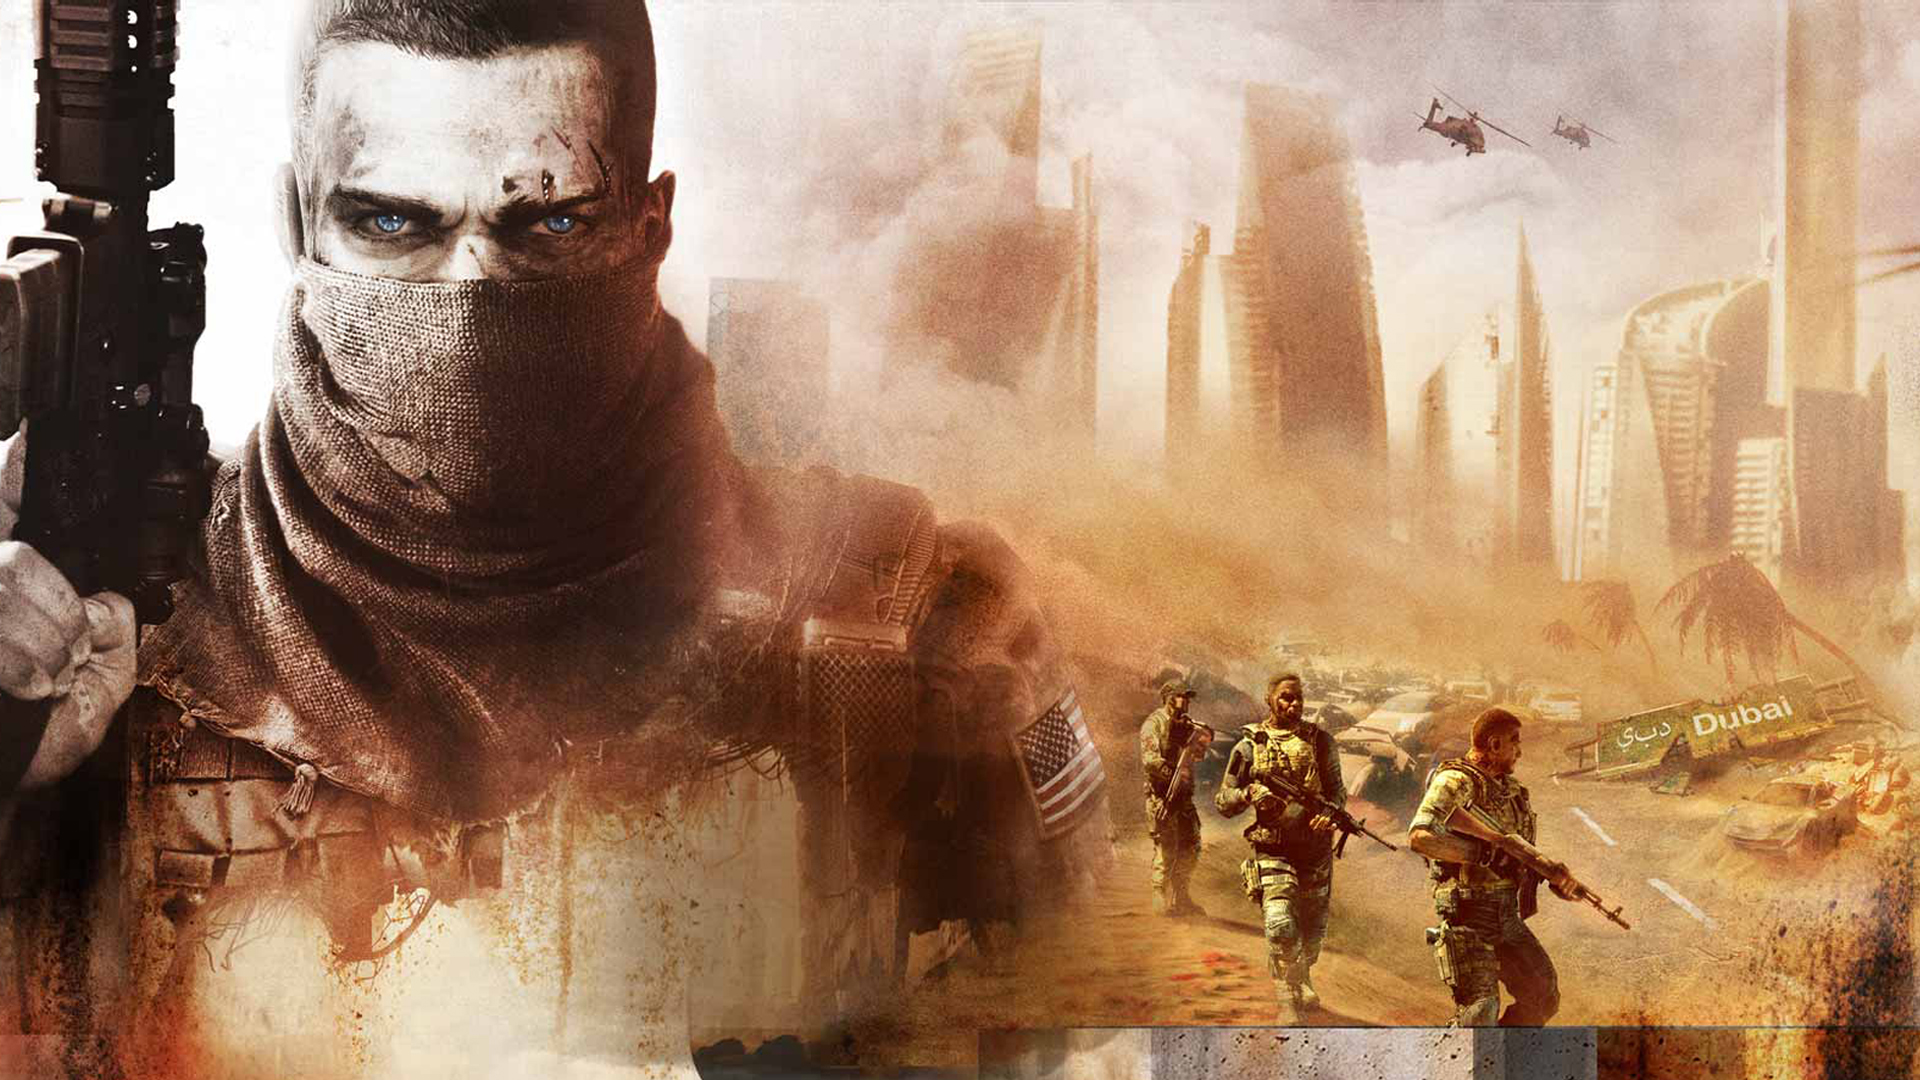 Spec Ops The Line Wallpaper HD Background Image